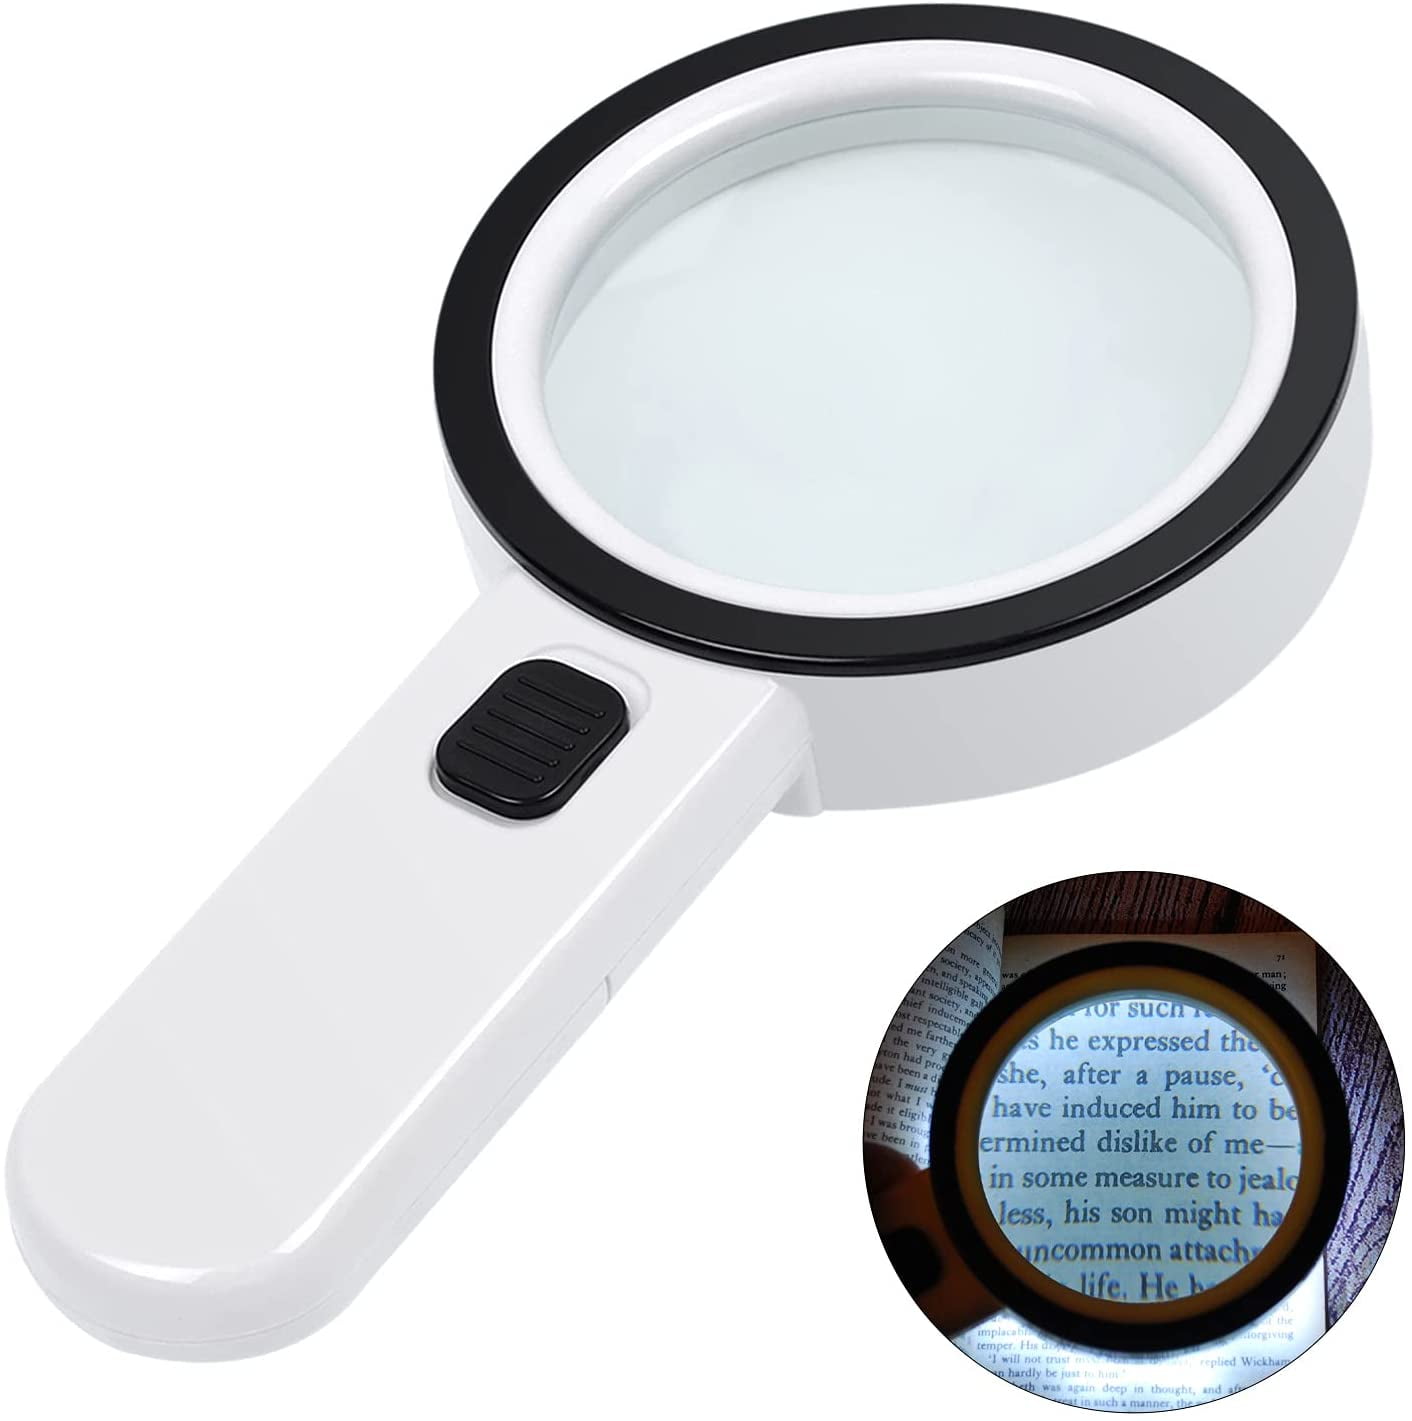 10x Handheld Magnifier Antique Mahogany Handle Magnifier Reading Magnifying  Glass For Reading Book, Inspection, Coins, Insects, Rocks, Map, Crossword